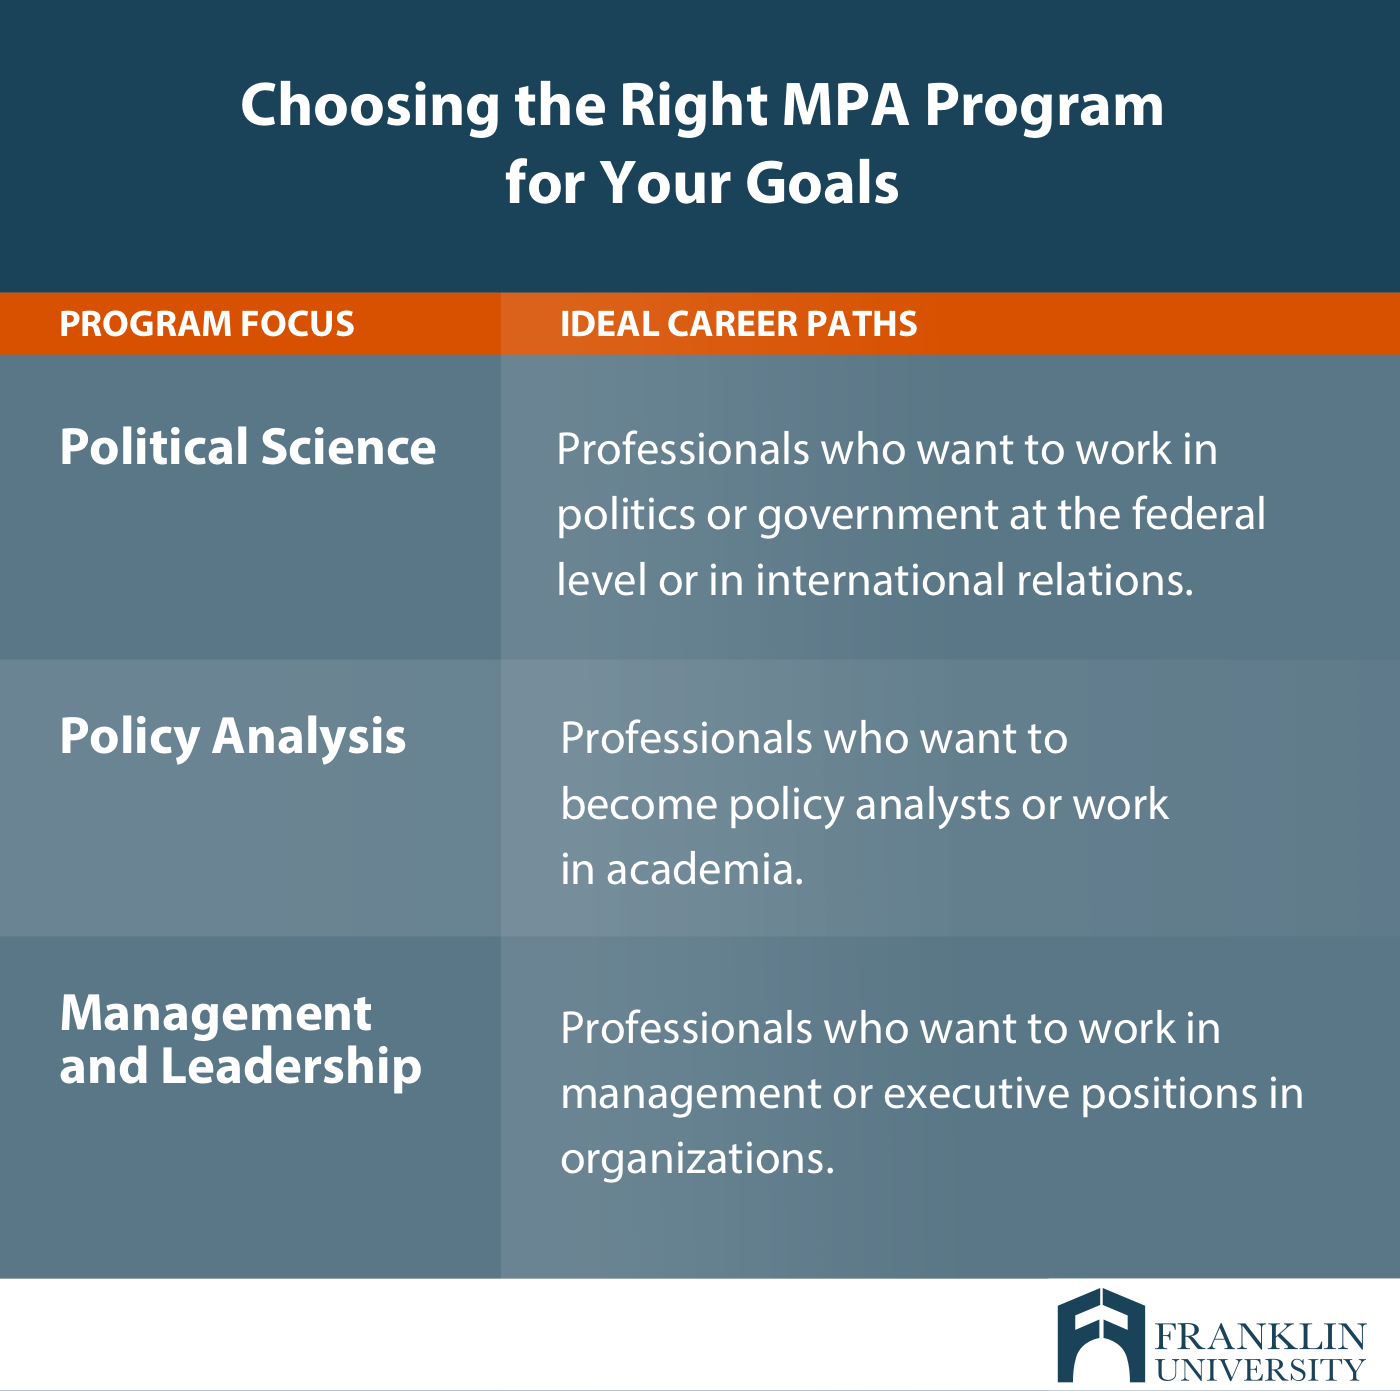 graphic describes choosing the right MPA program for your goals